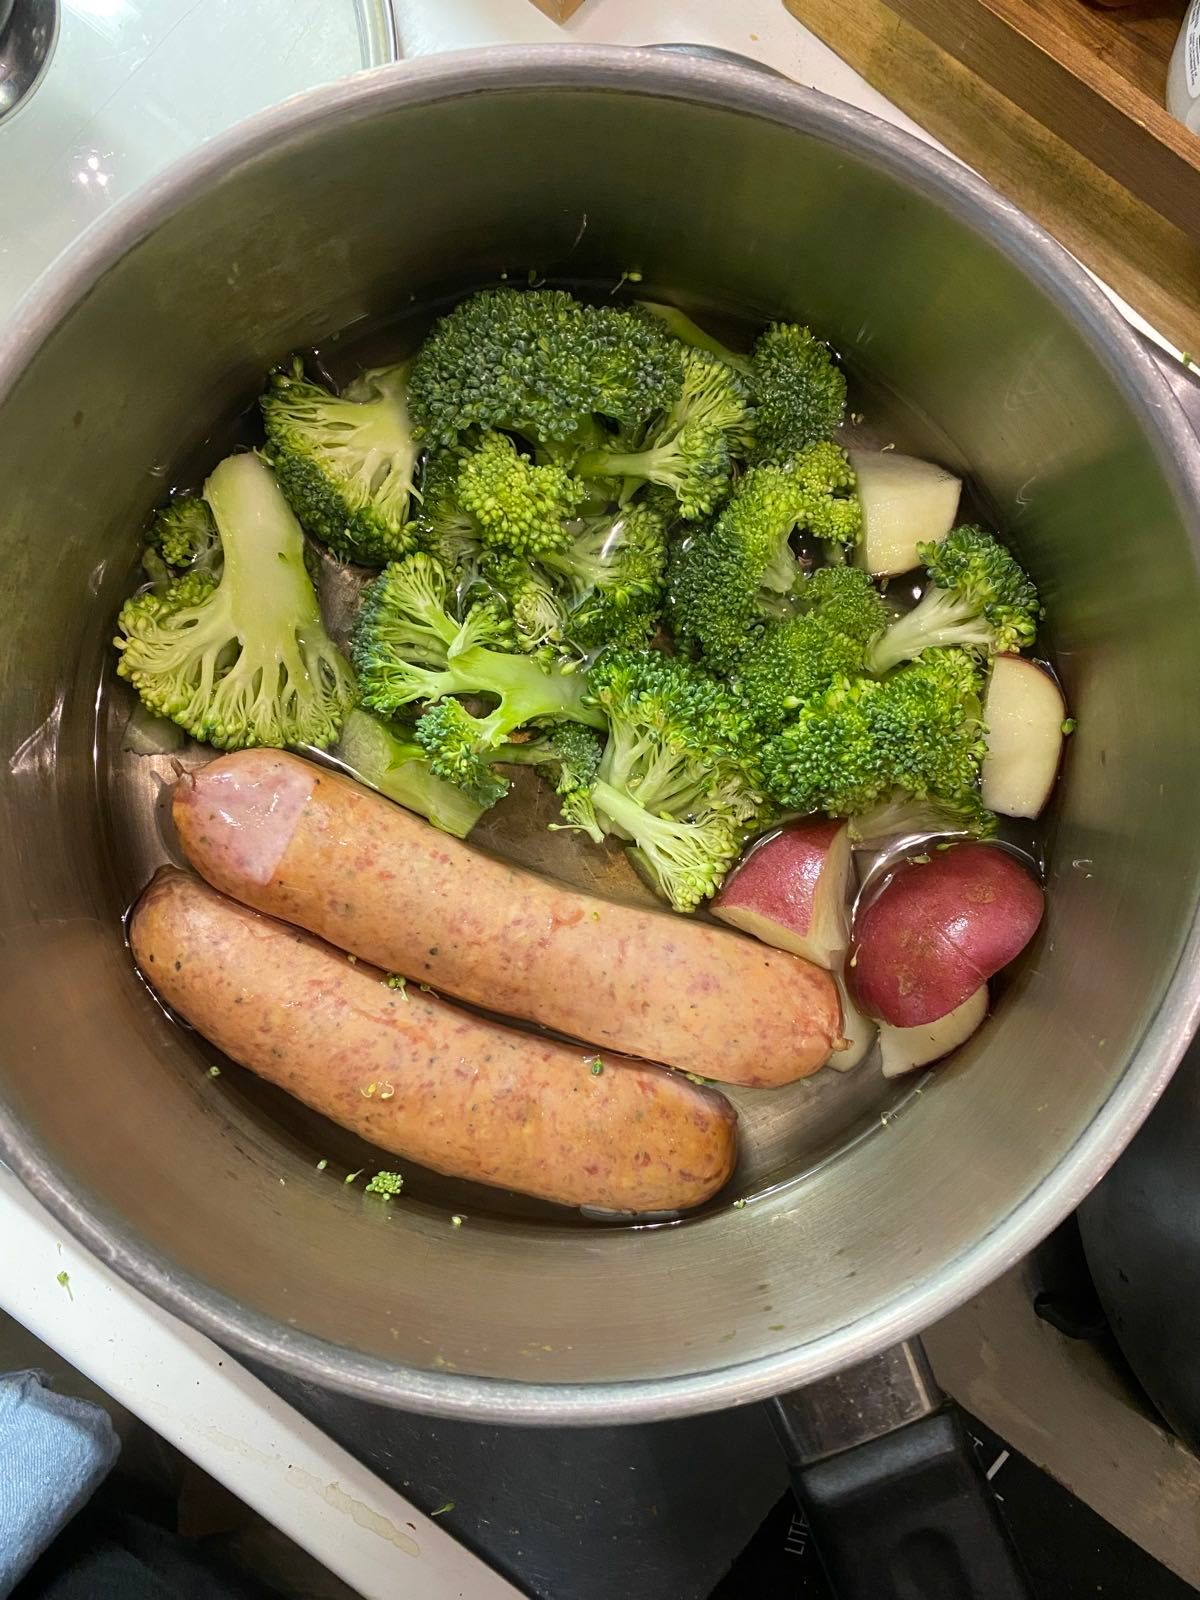 dinner time! a quick and easy sausage meal to replenish after a rigorous hilly hike (and a sore back).  veggies lightly seasoned with coconut oil & spike.